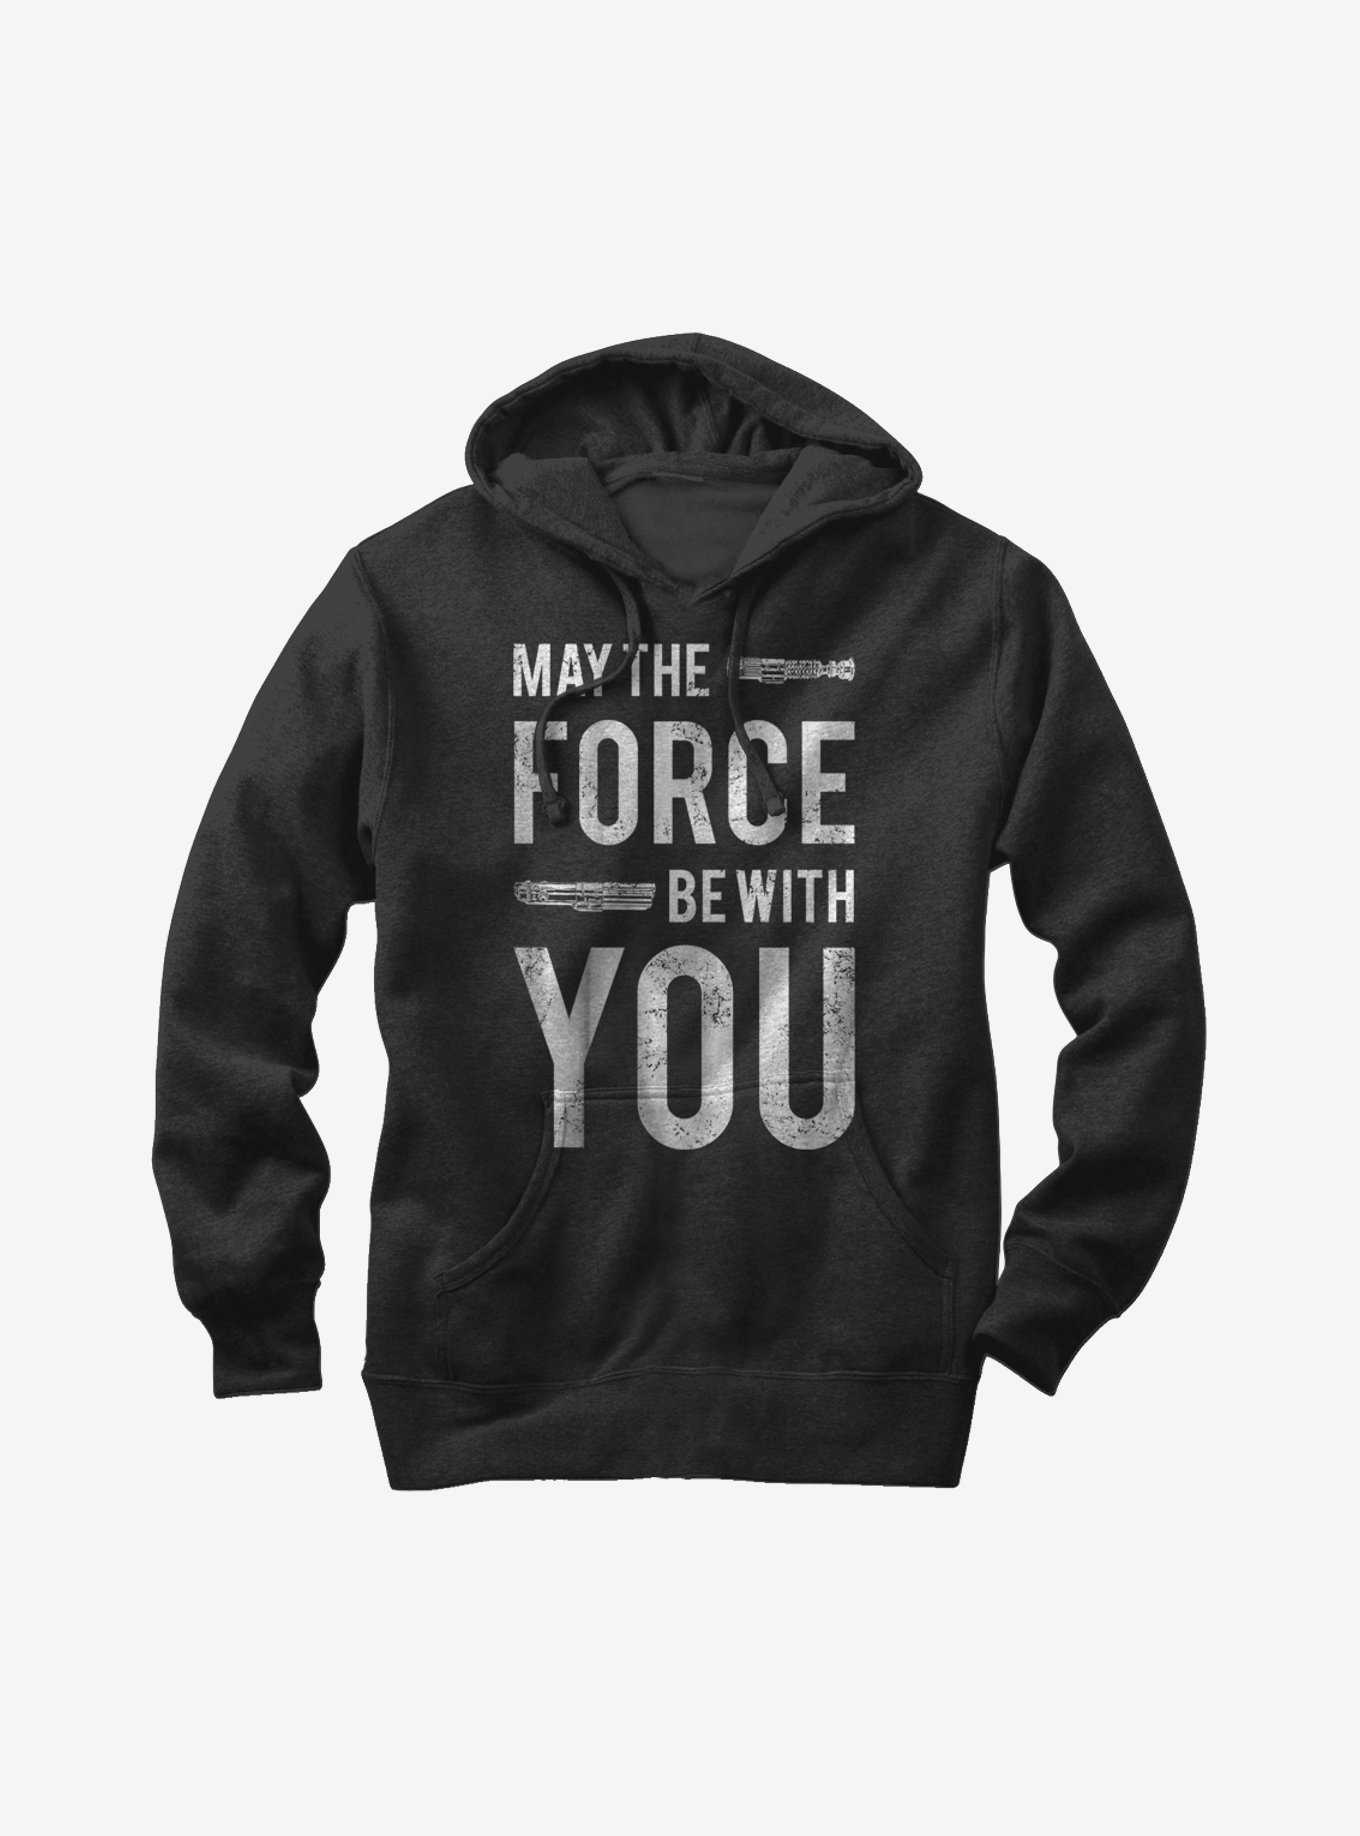 Star Wars May the Force Be With You Lightsaber Hoodie, , hi-res